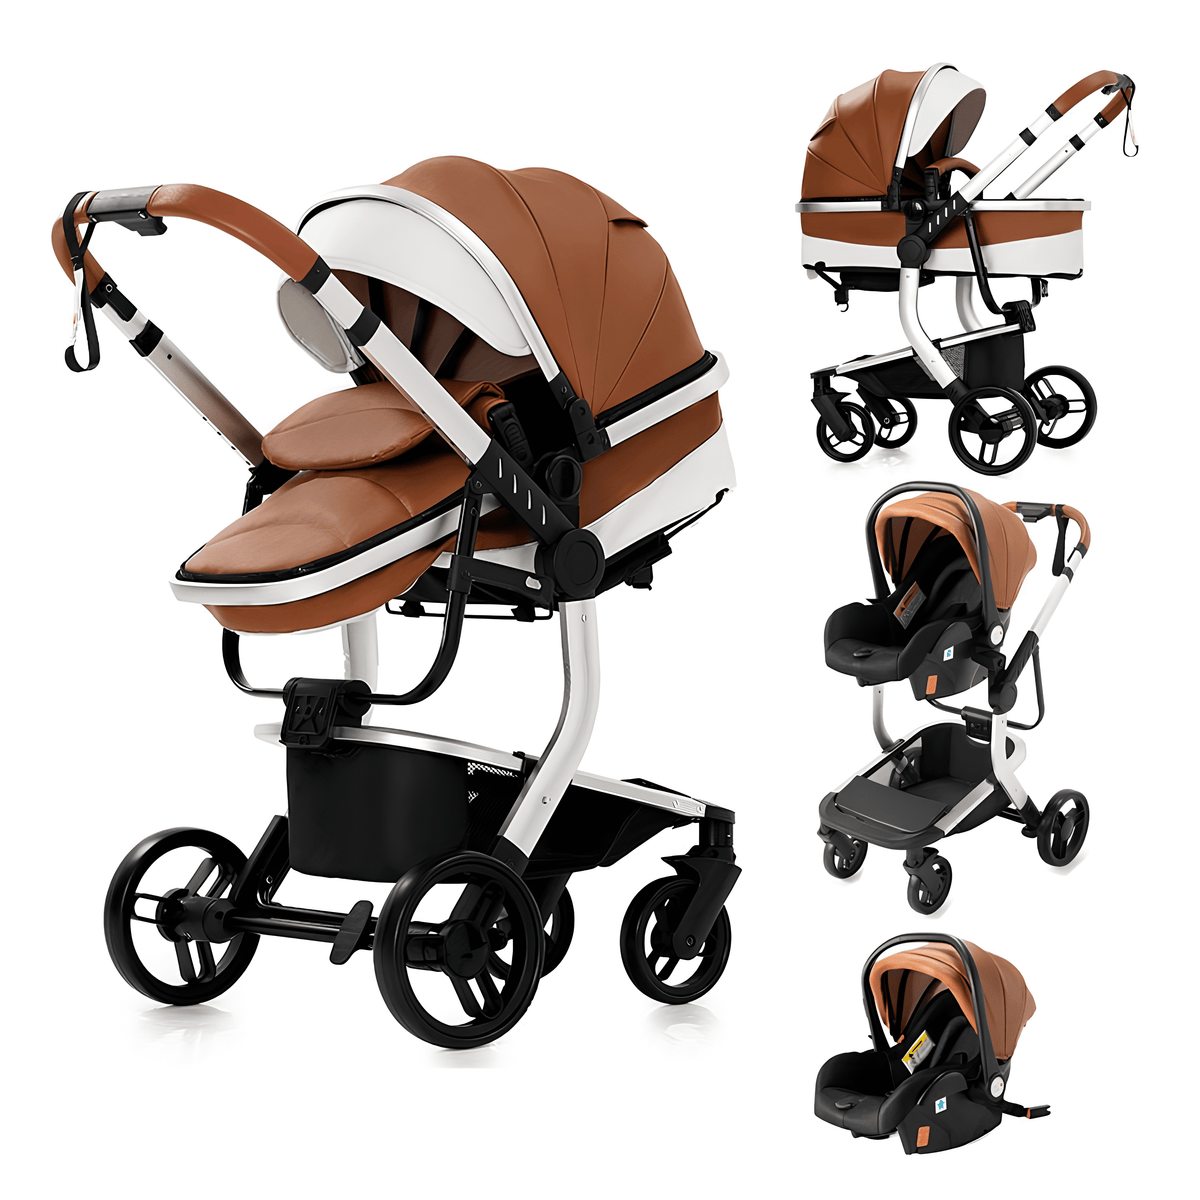 Luxury Leather 3-in-1 Baby Stroller